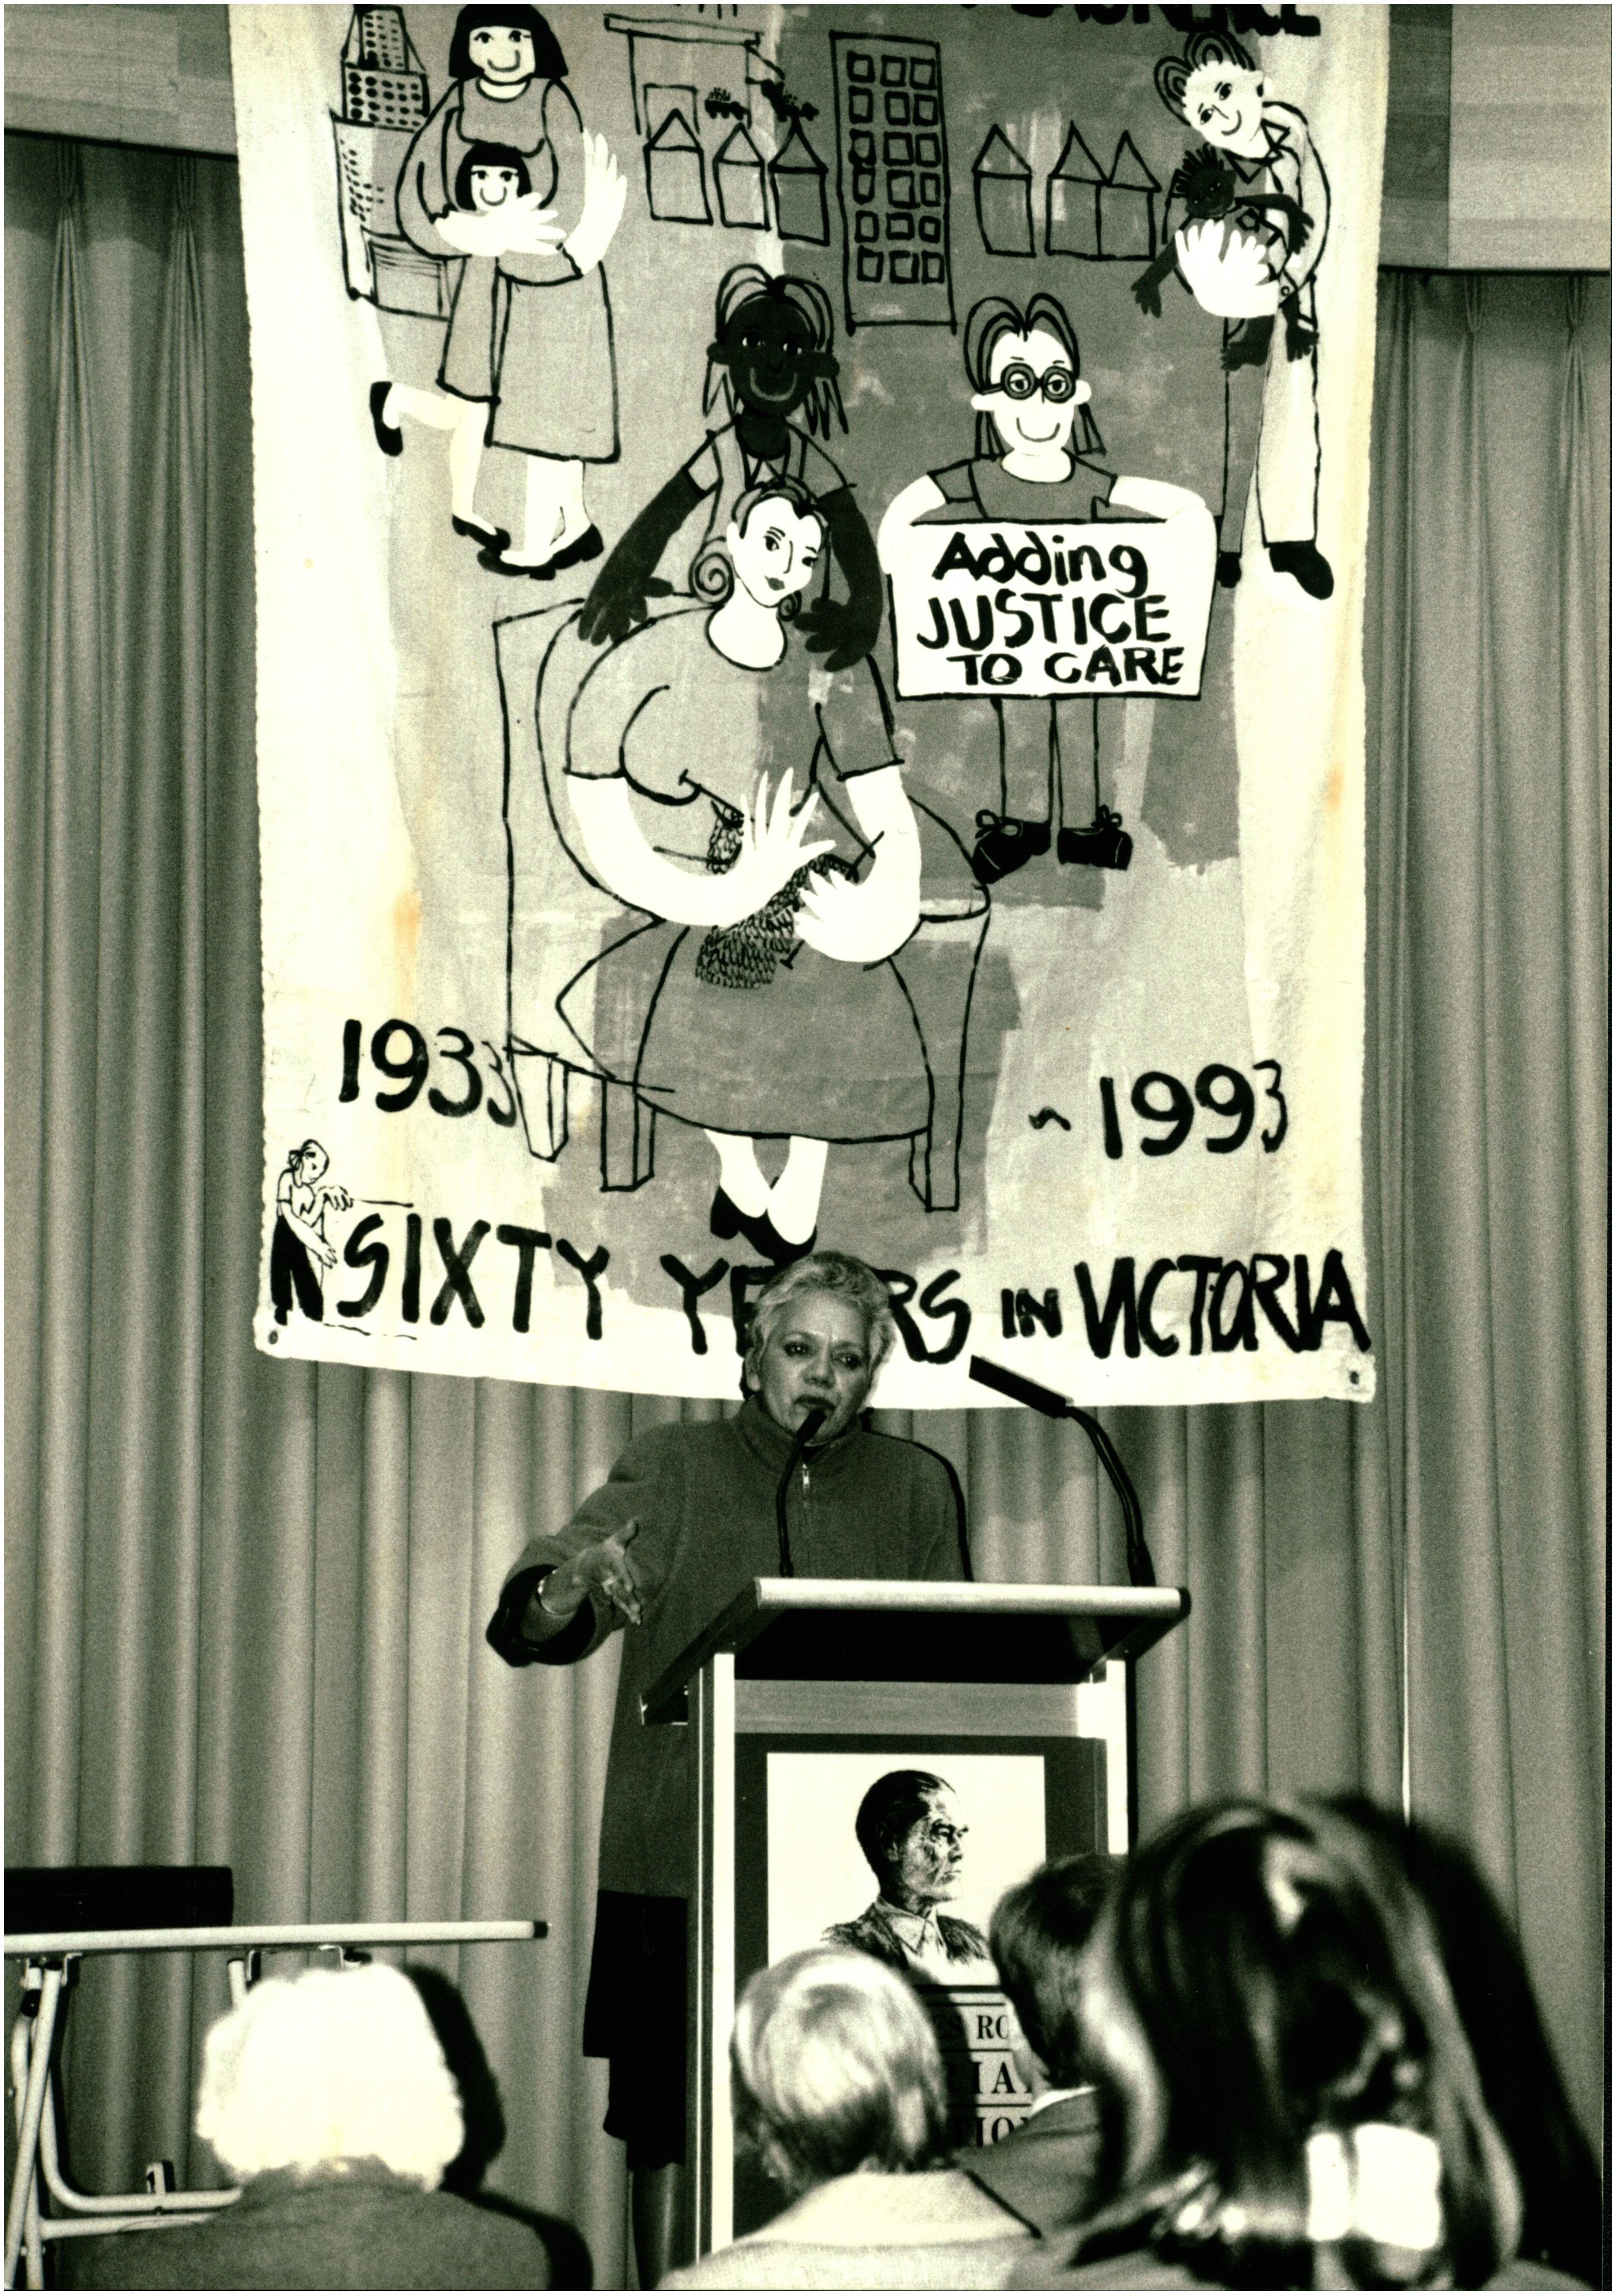 This is a black and white photo of Lillian Holt addressing the audience at the 1993 Sambell Oration. She is standing in front of a banner that says 'Adding justice to care' and '60 years in Victoria'